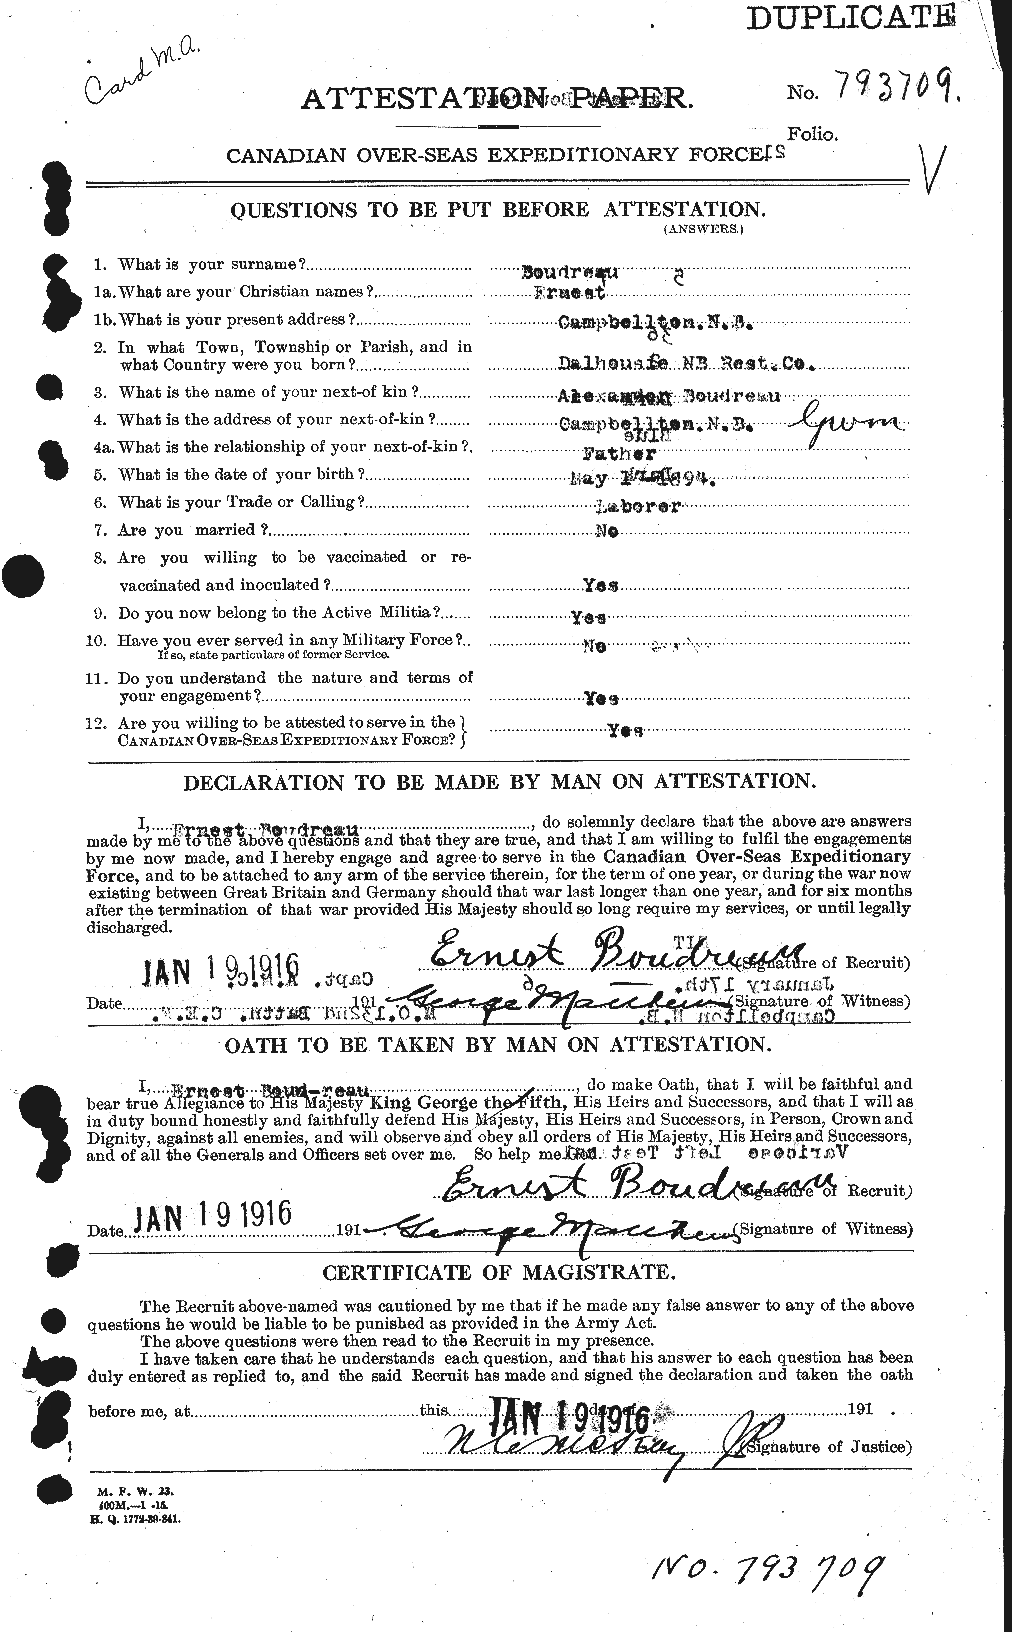 Personnel Records of the First World War - CEF 255709a